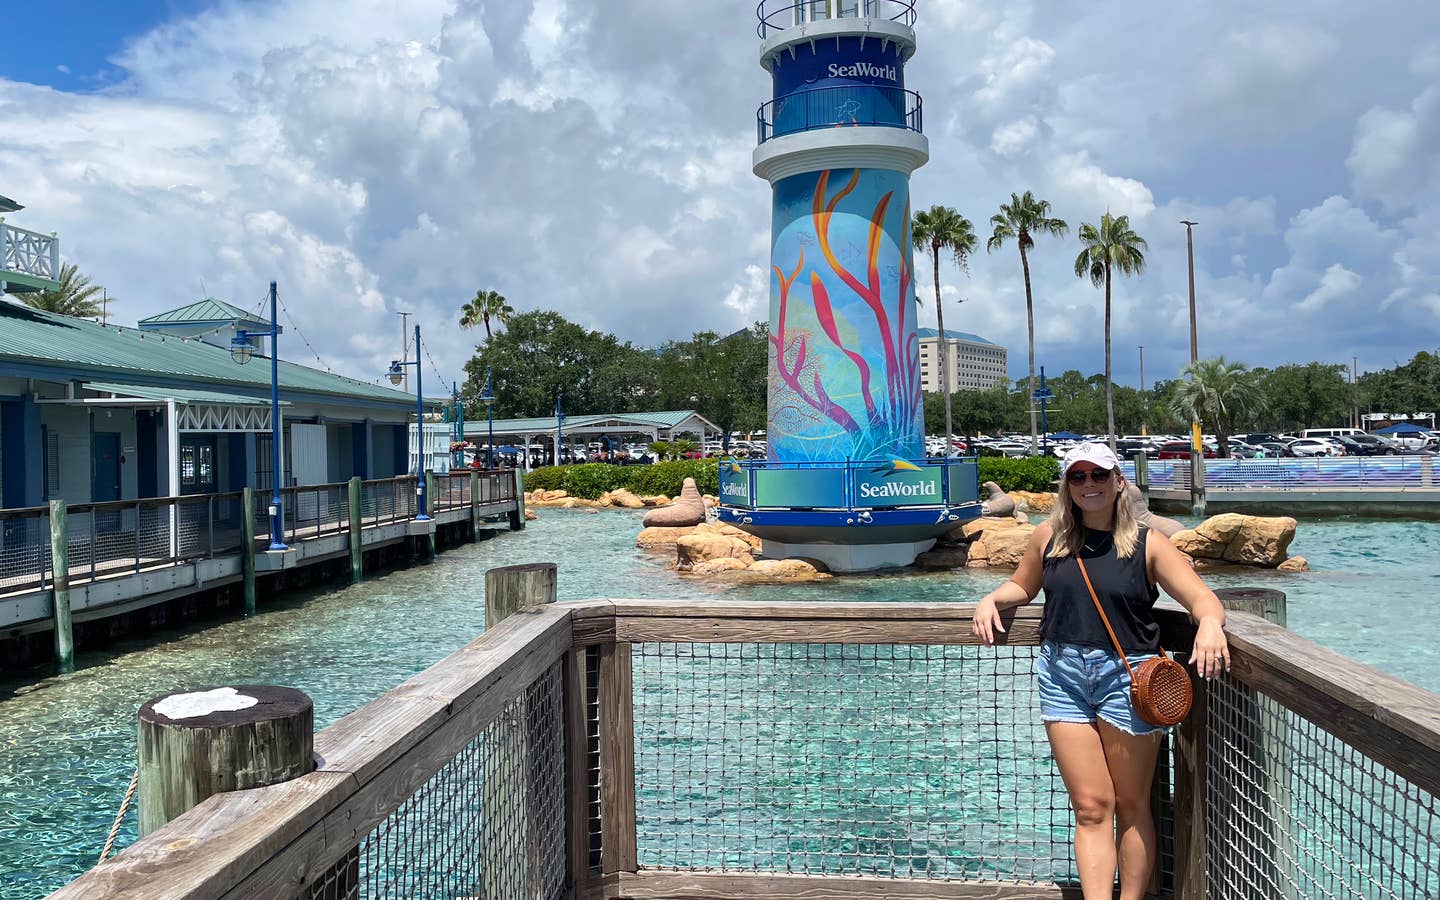 A Caucasian female wearing a pink baseball cap and black tank top stands near the lighthouse in SeaWorld Orlando.